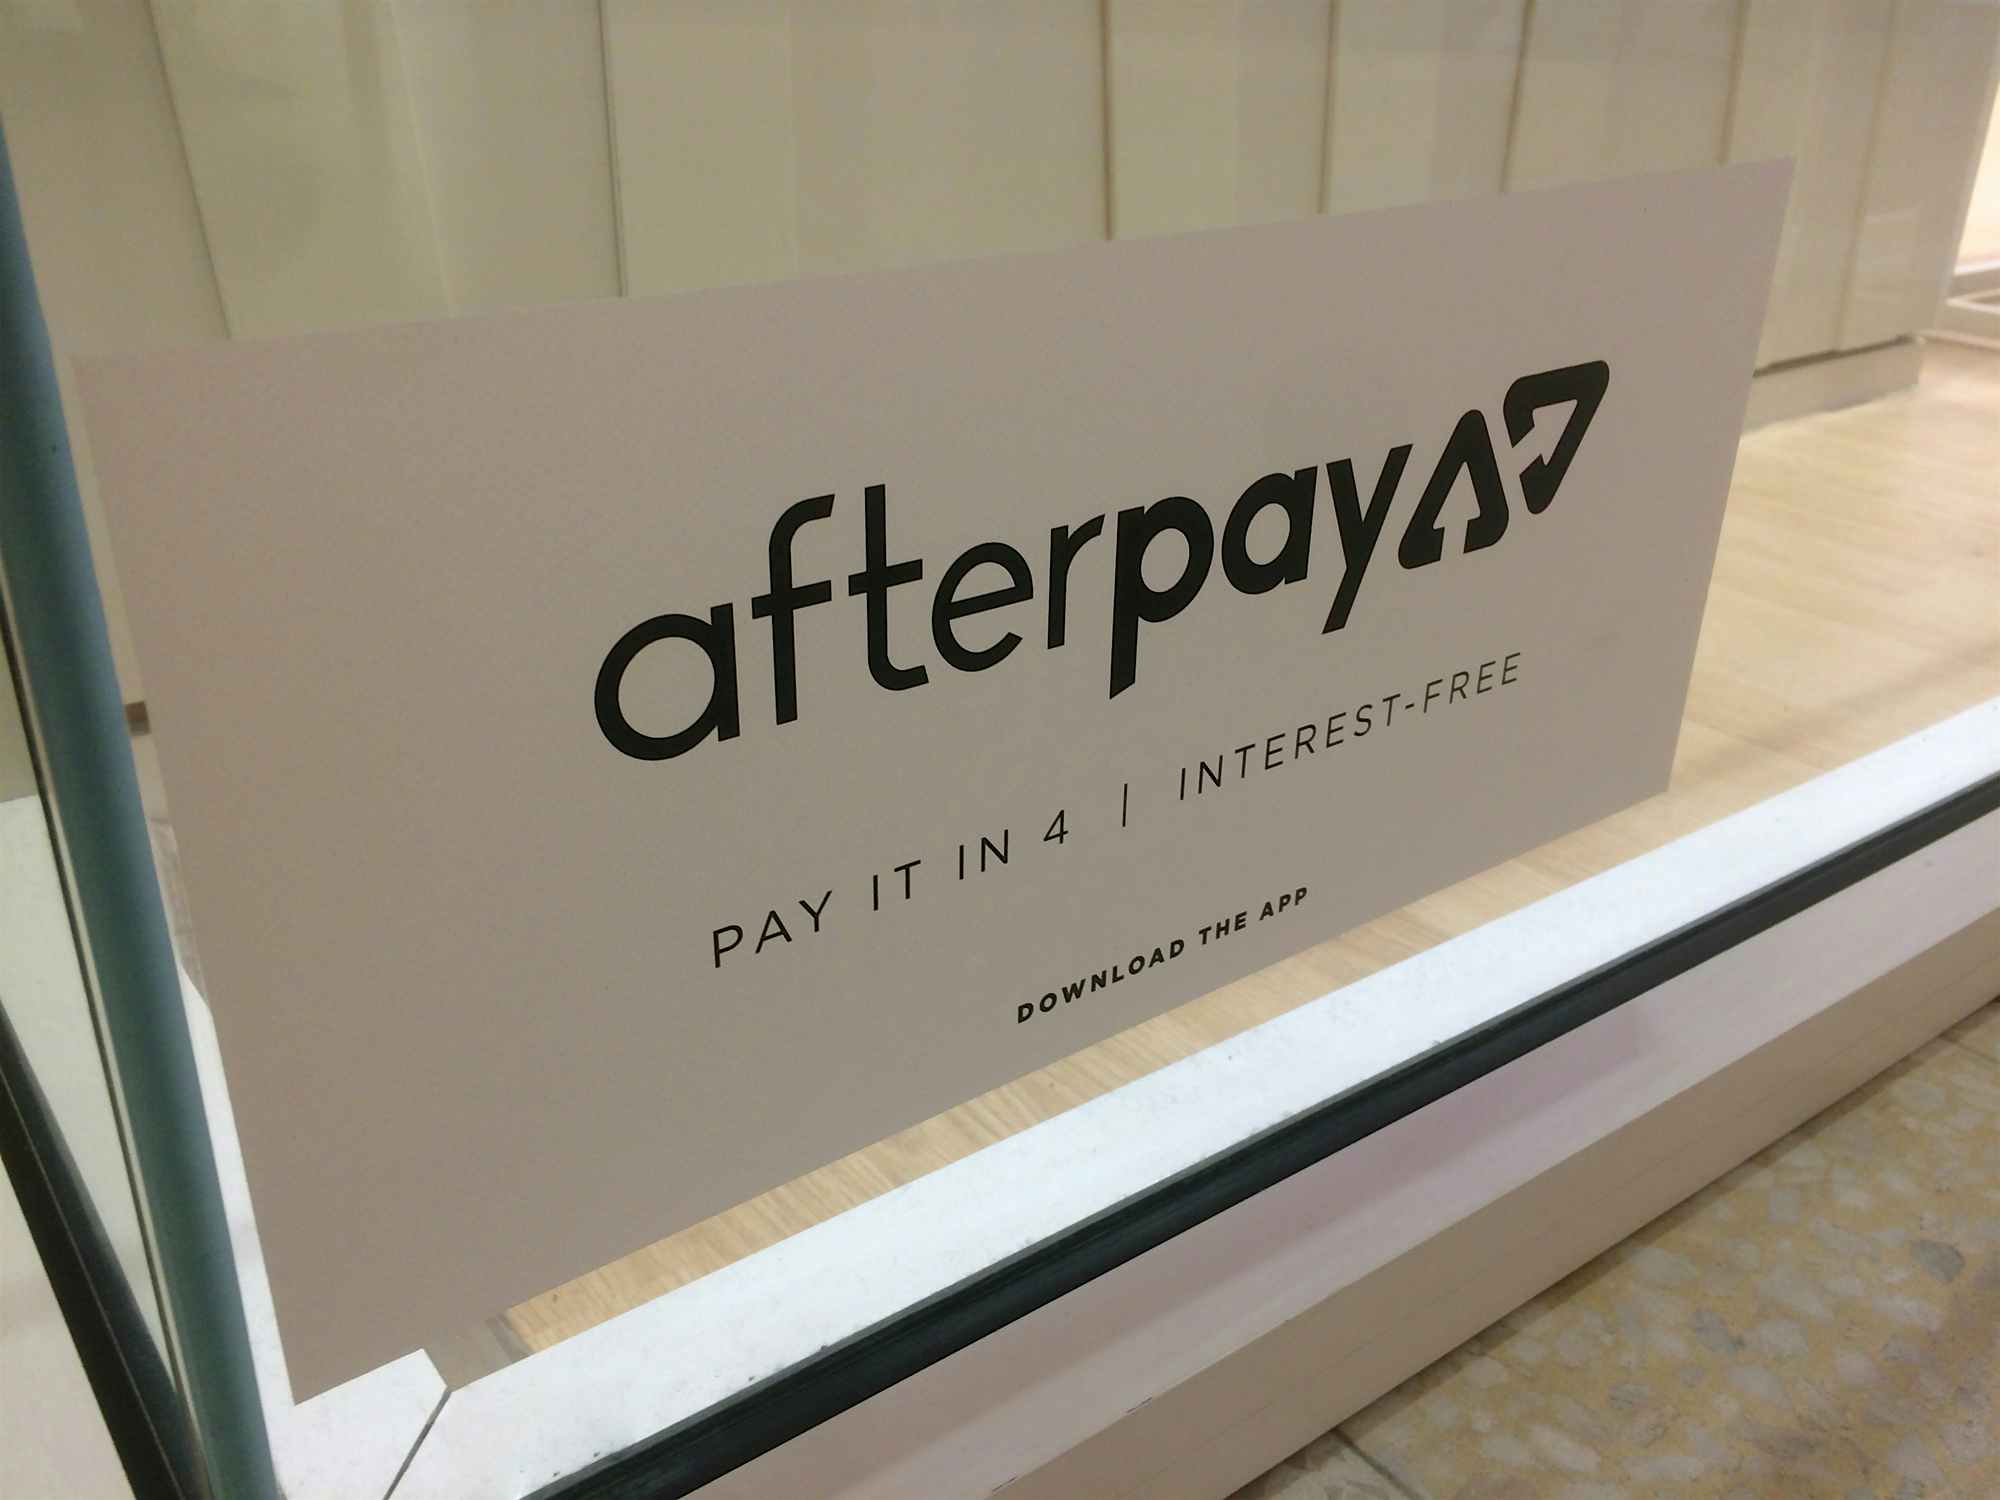 If you guys have the afterpay app, you can get a BB&W gift card up to 500  dollars and then make payments of 4 on it! So Im considering doing the $100